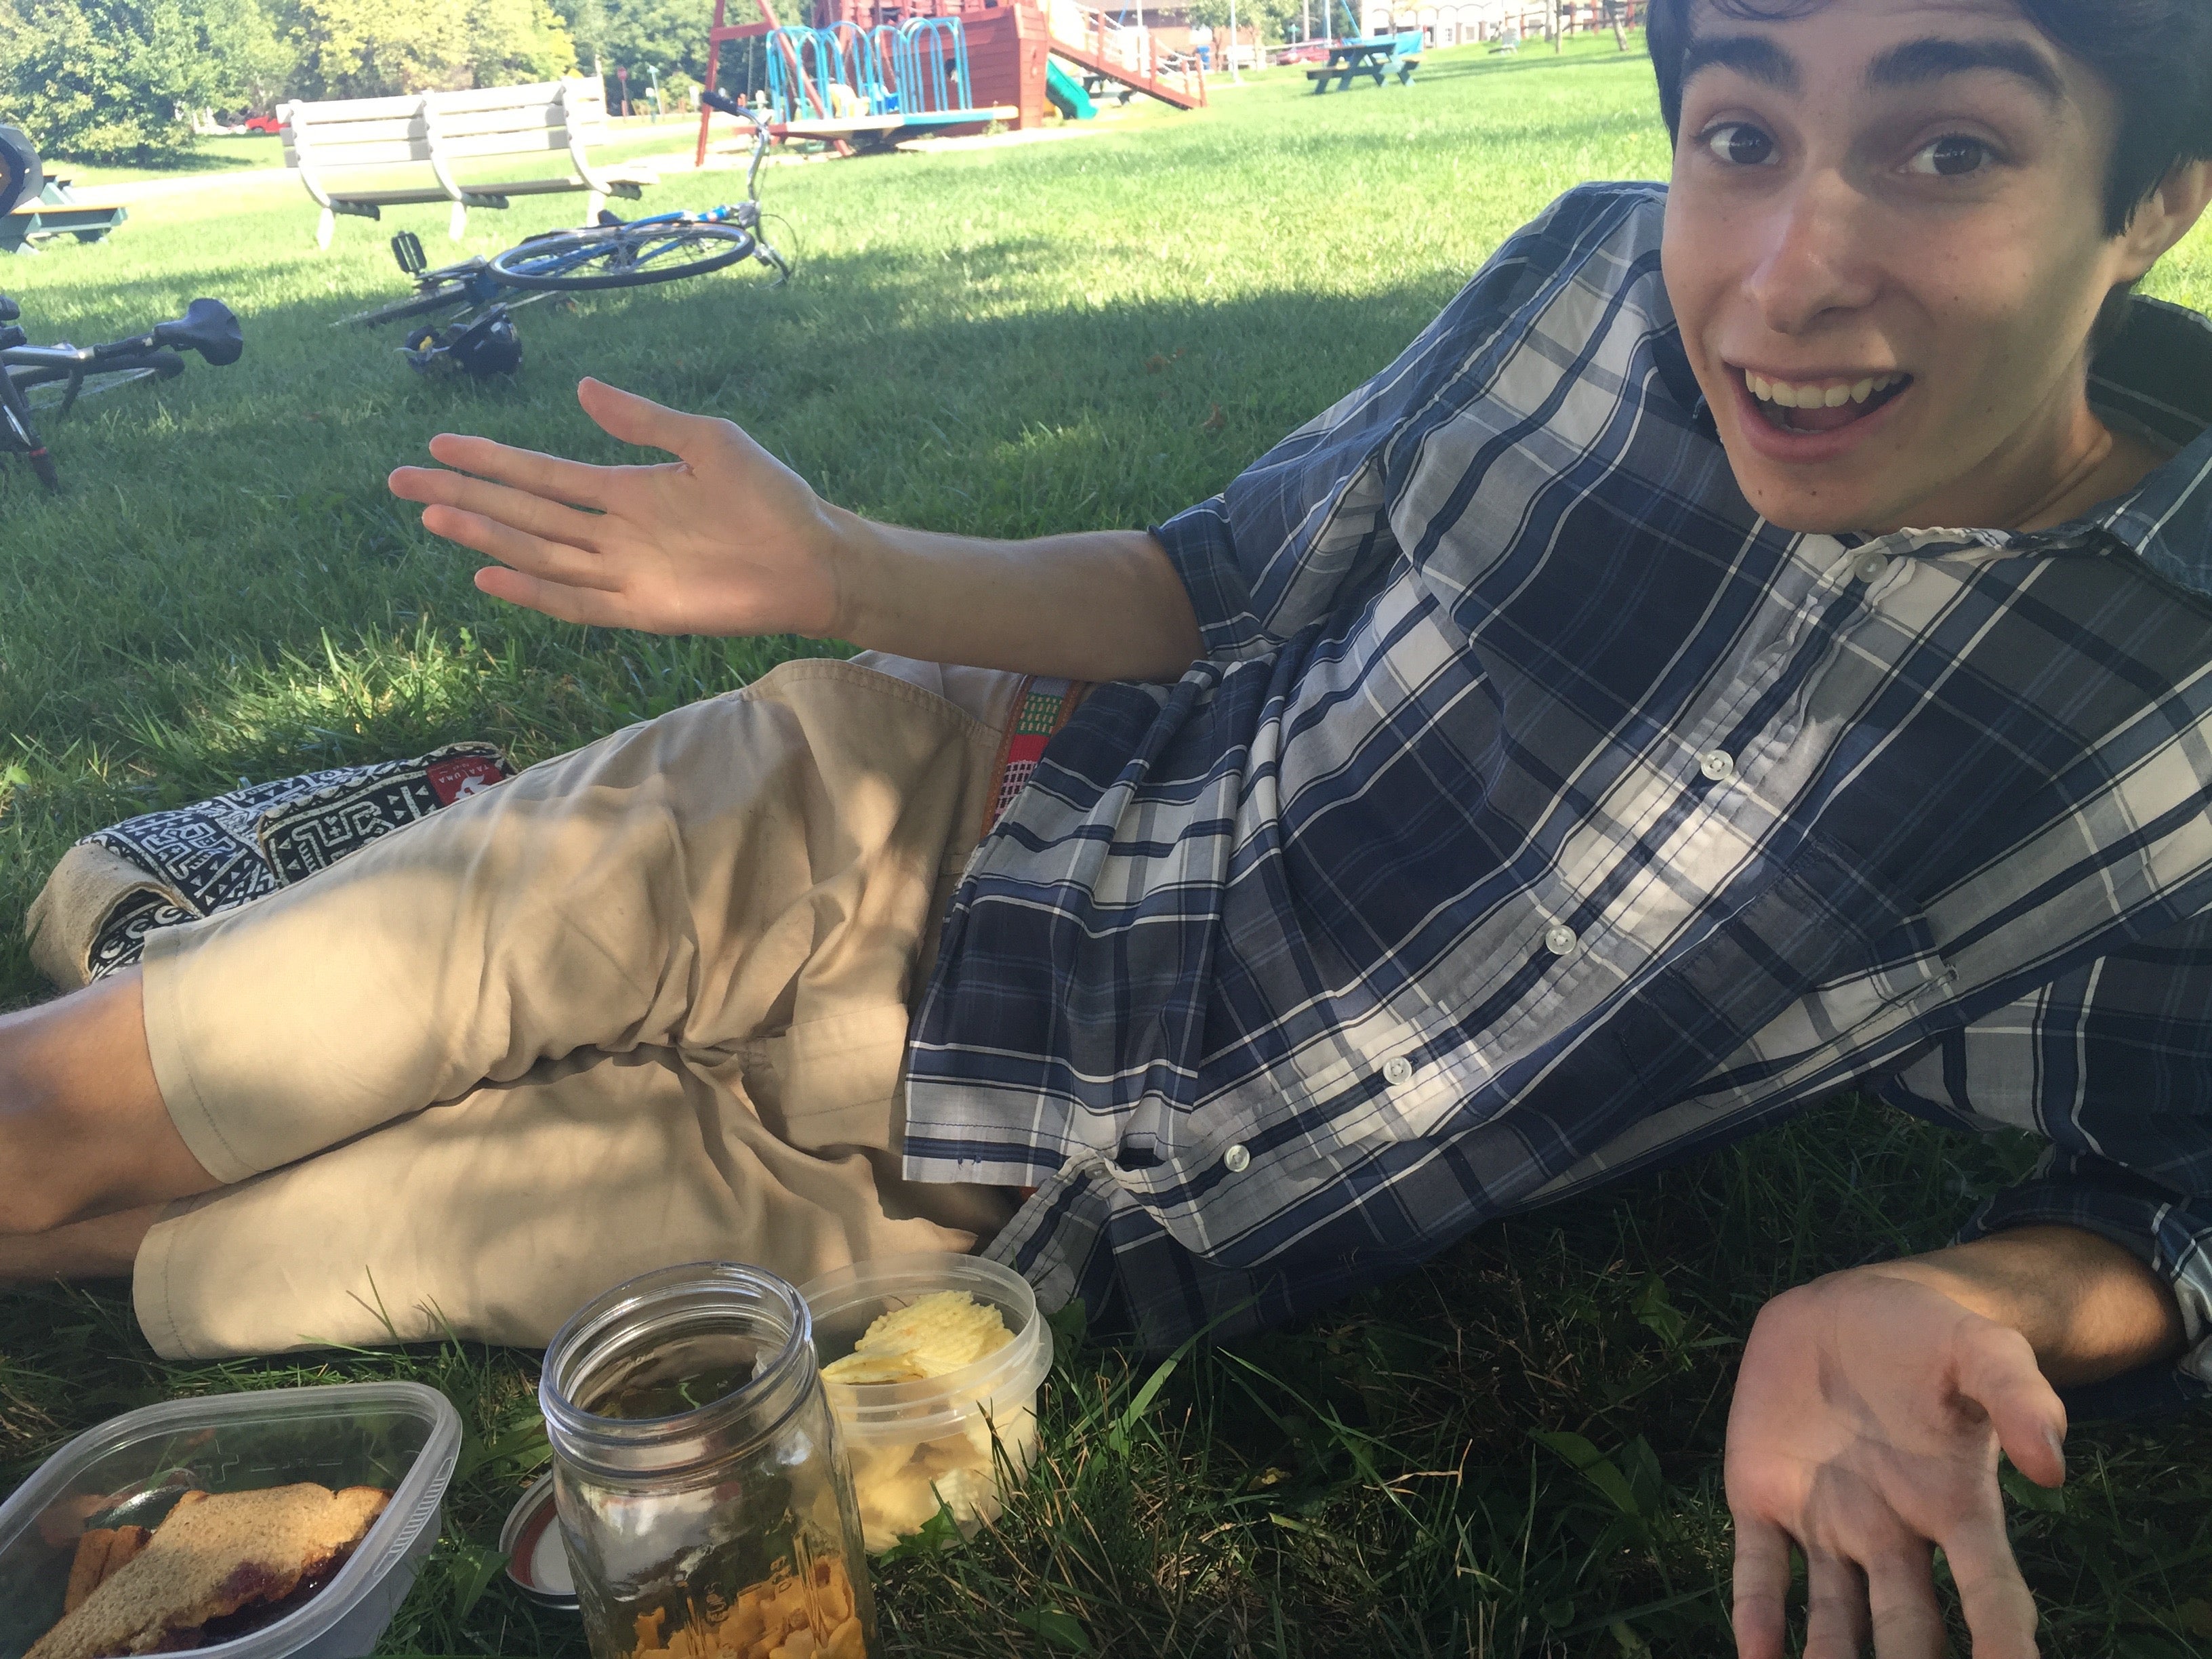 Joey with our picnic